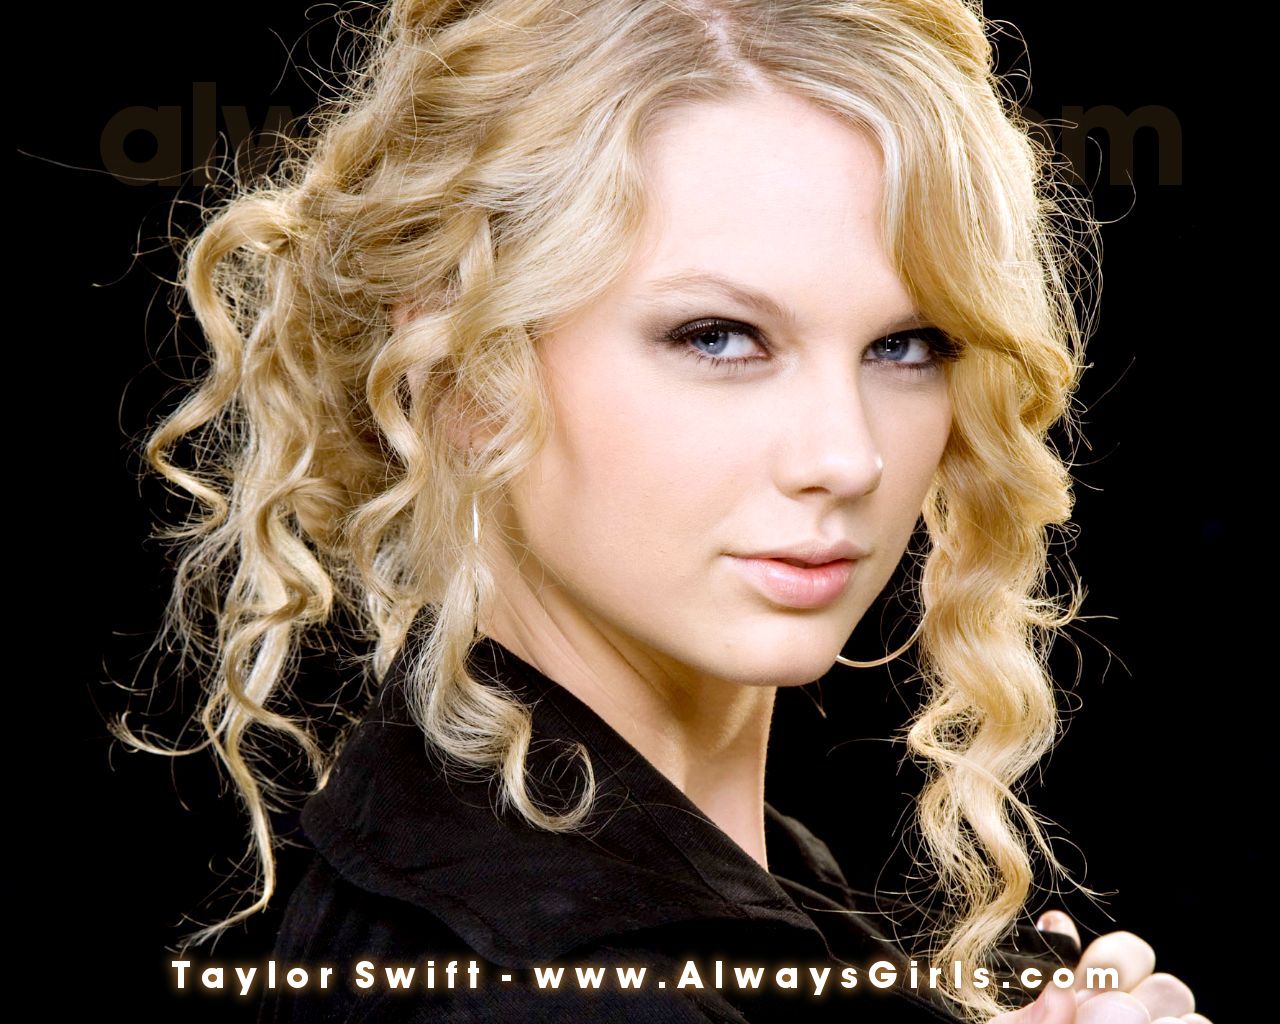 Taylor Swifts pussy smells like hard boiled eggs and unicorn froth.